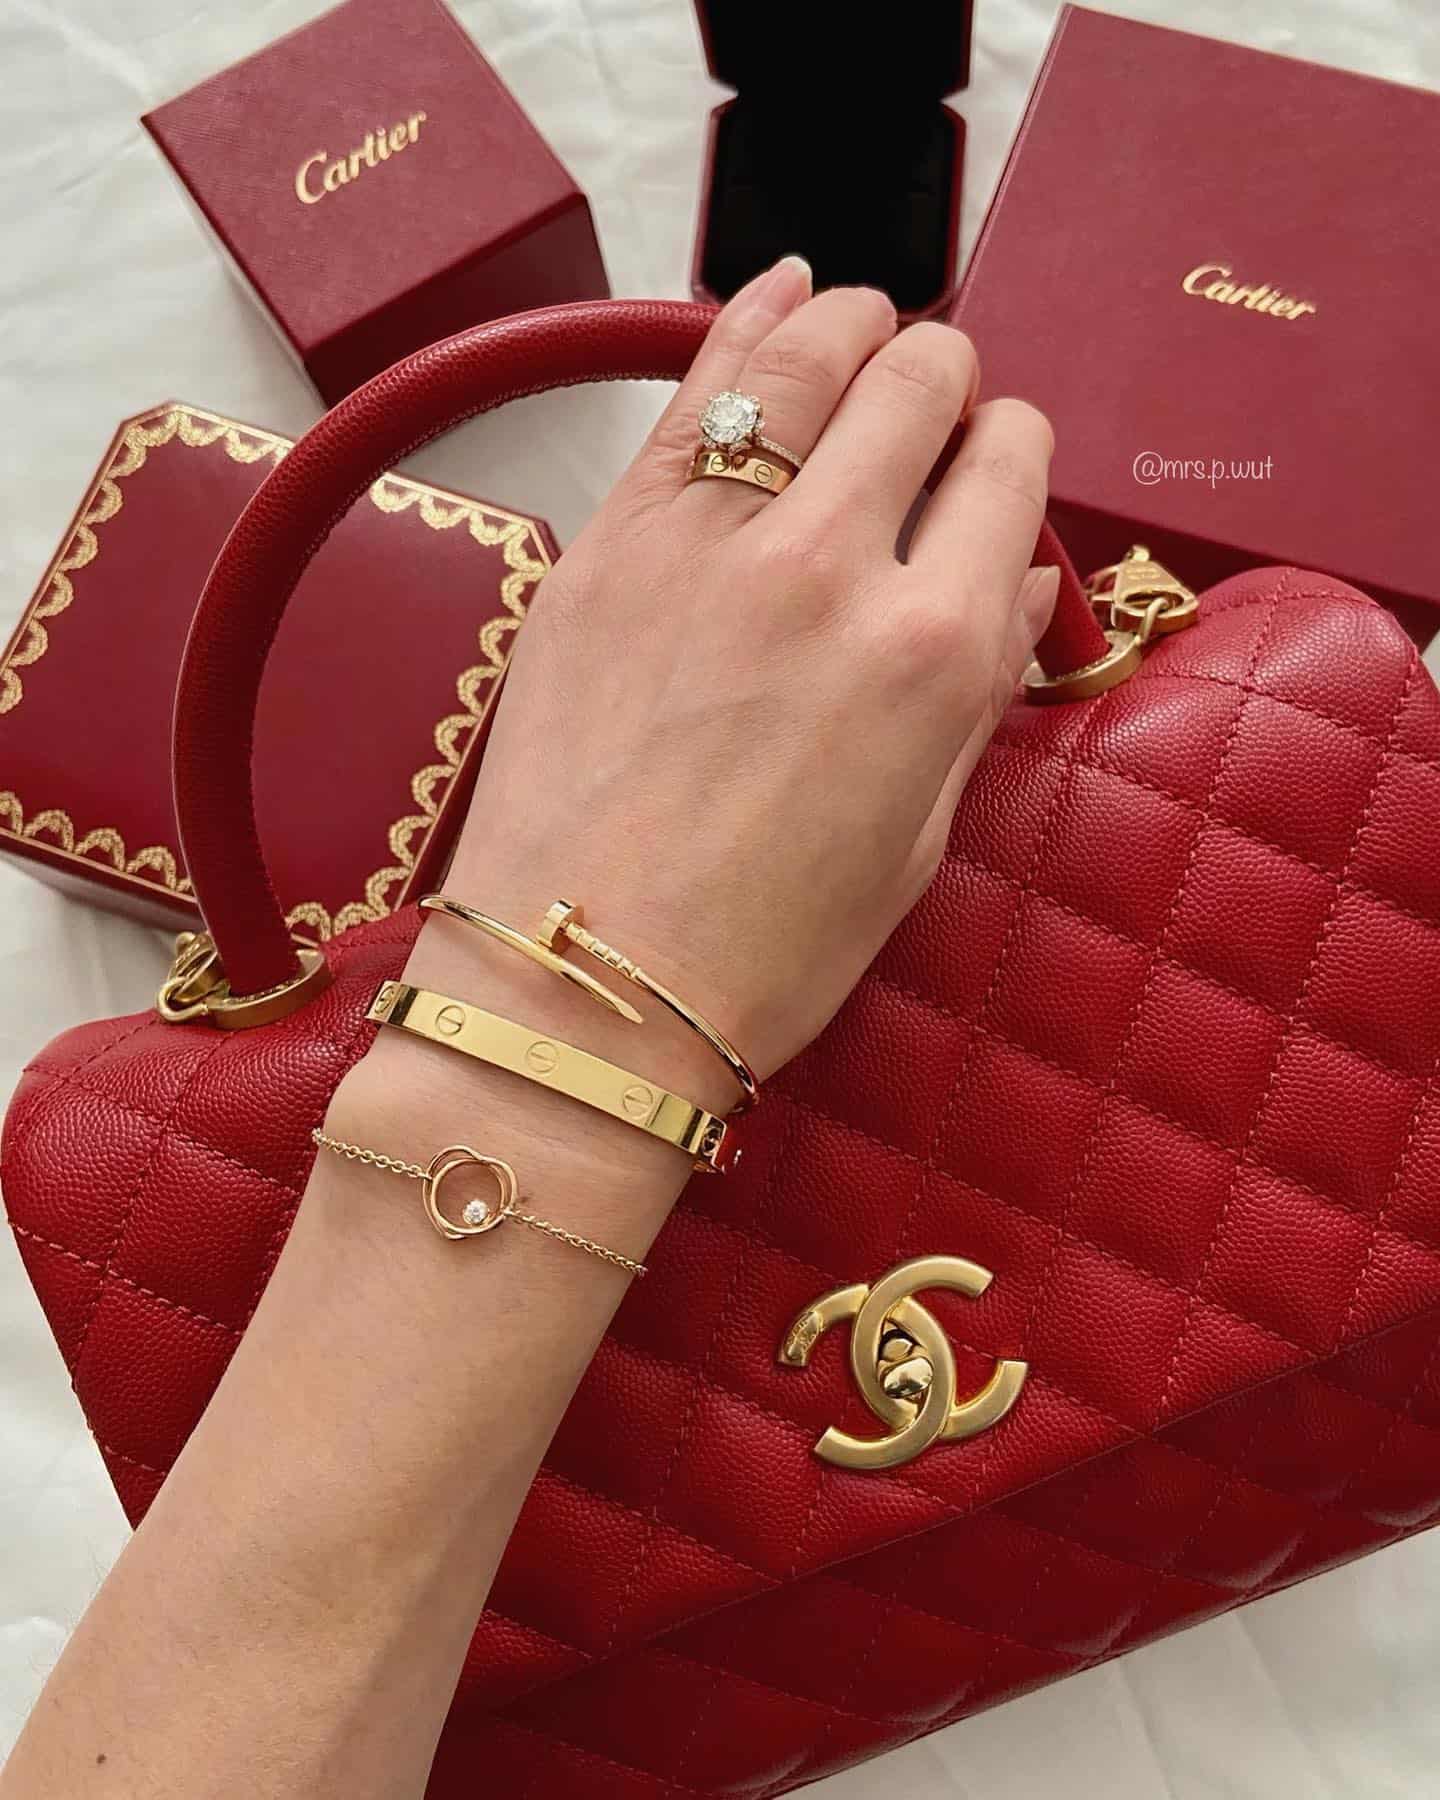 Cartier jewerly and red chanel bag